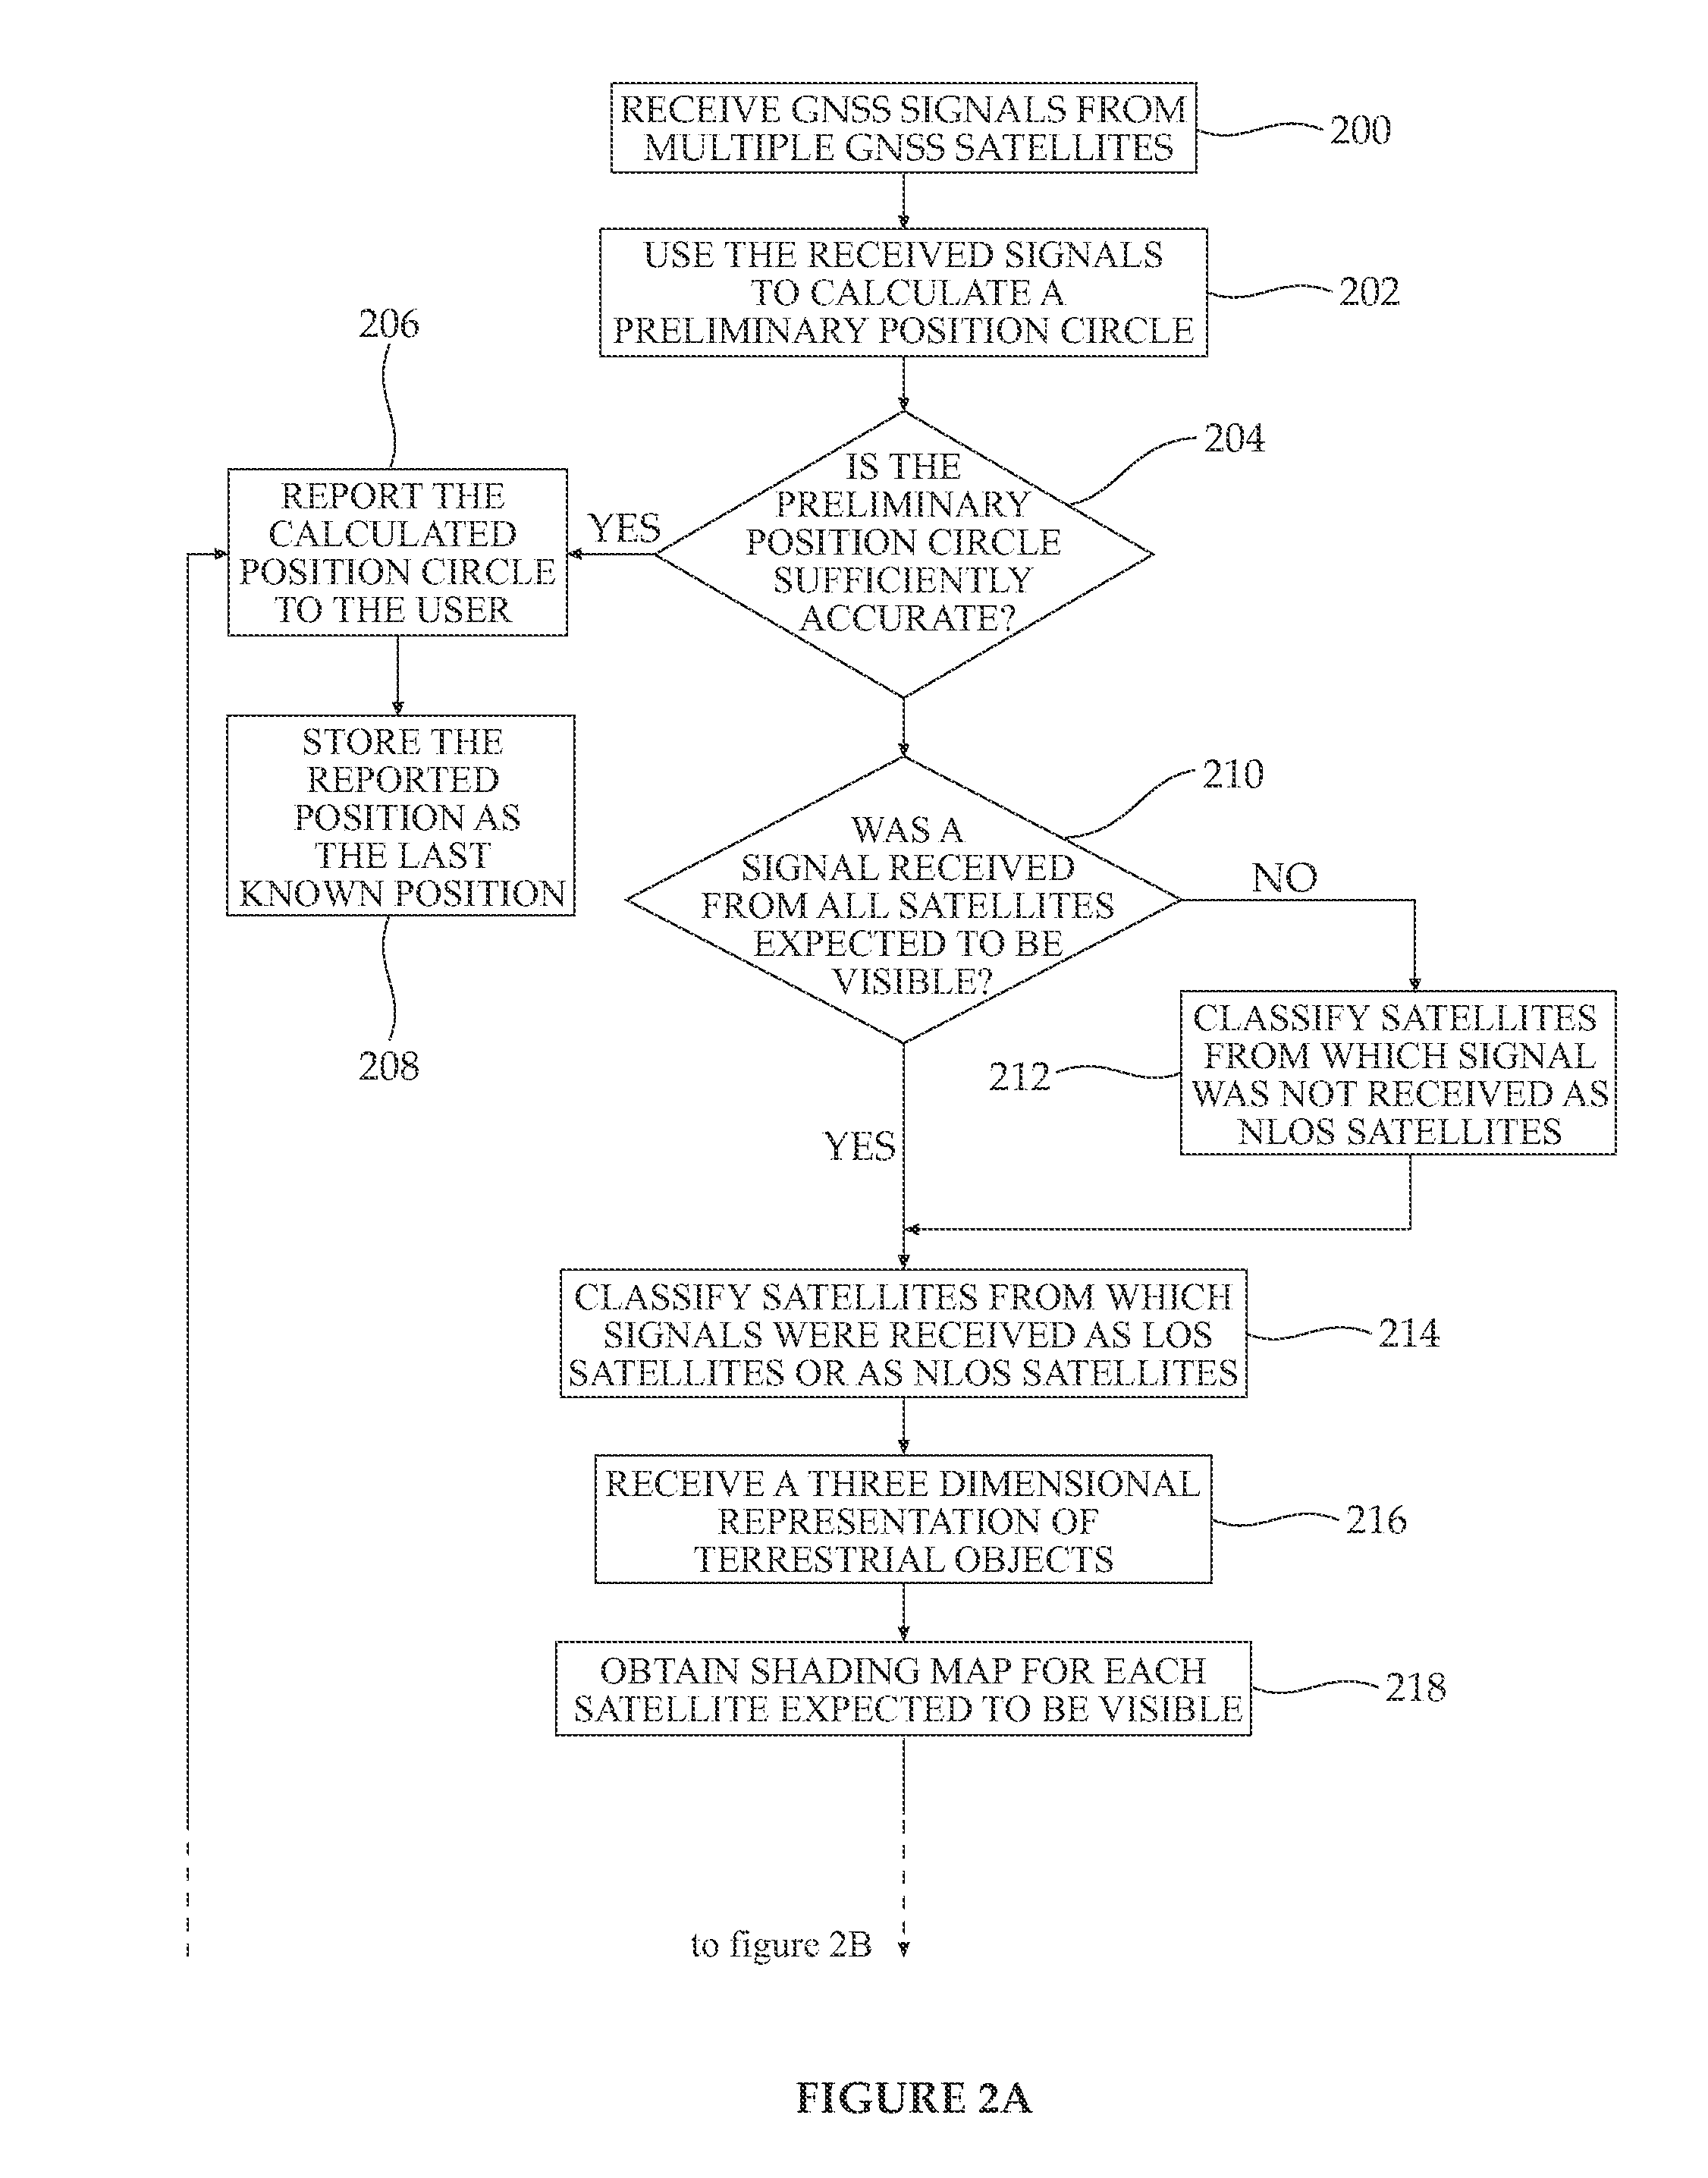 Methods, devices, and uses for calculating a position using a global navigation satellite system